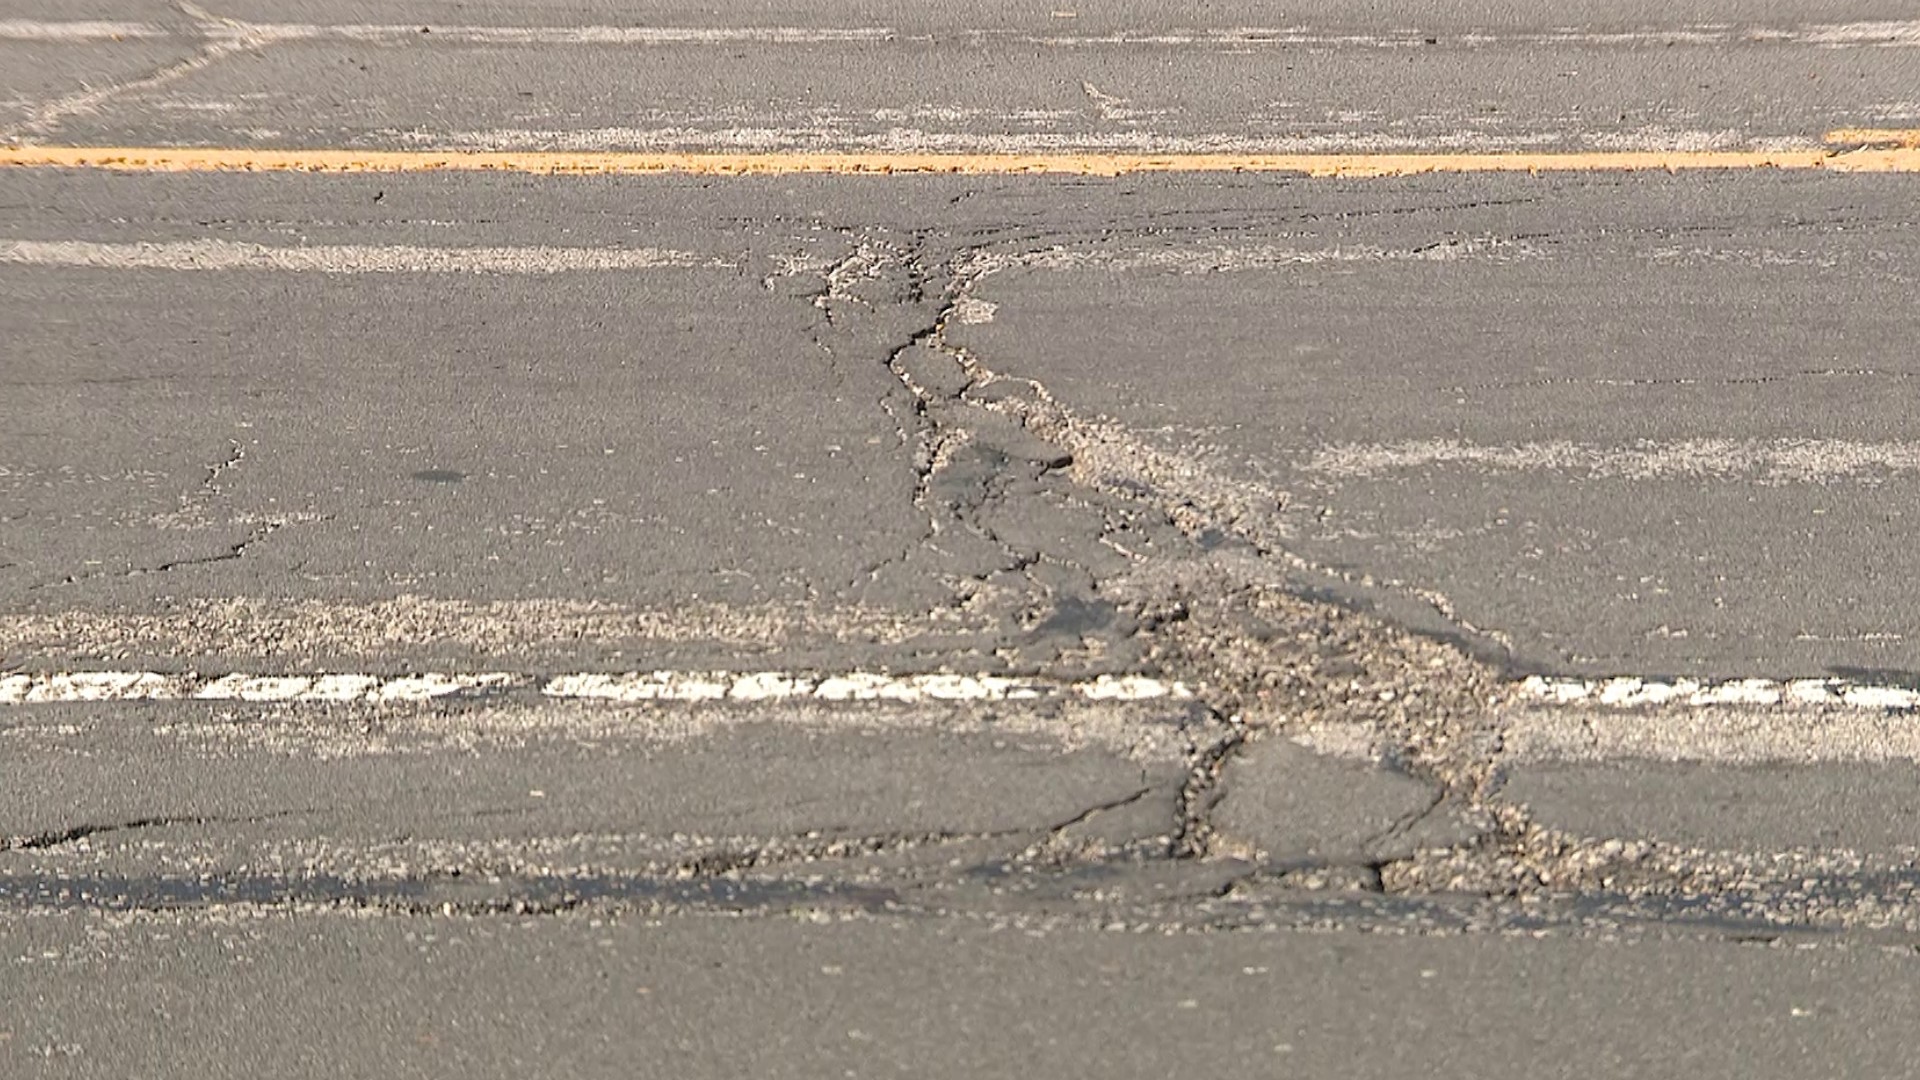 The hot and cold temps we’ve been having are a breeding ground for potholes. Viewers told 5 On Your Side road problems have gotten out of hand.